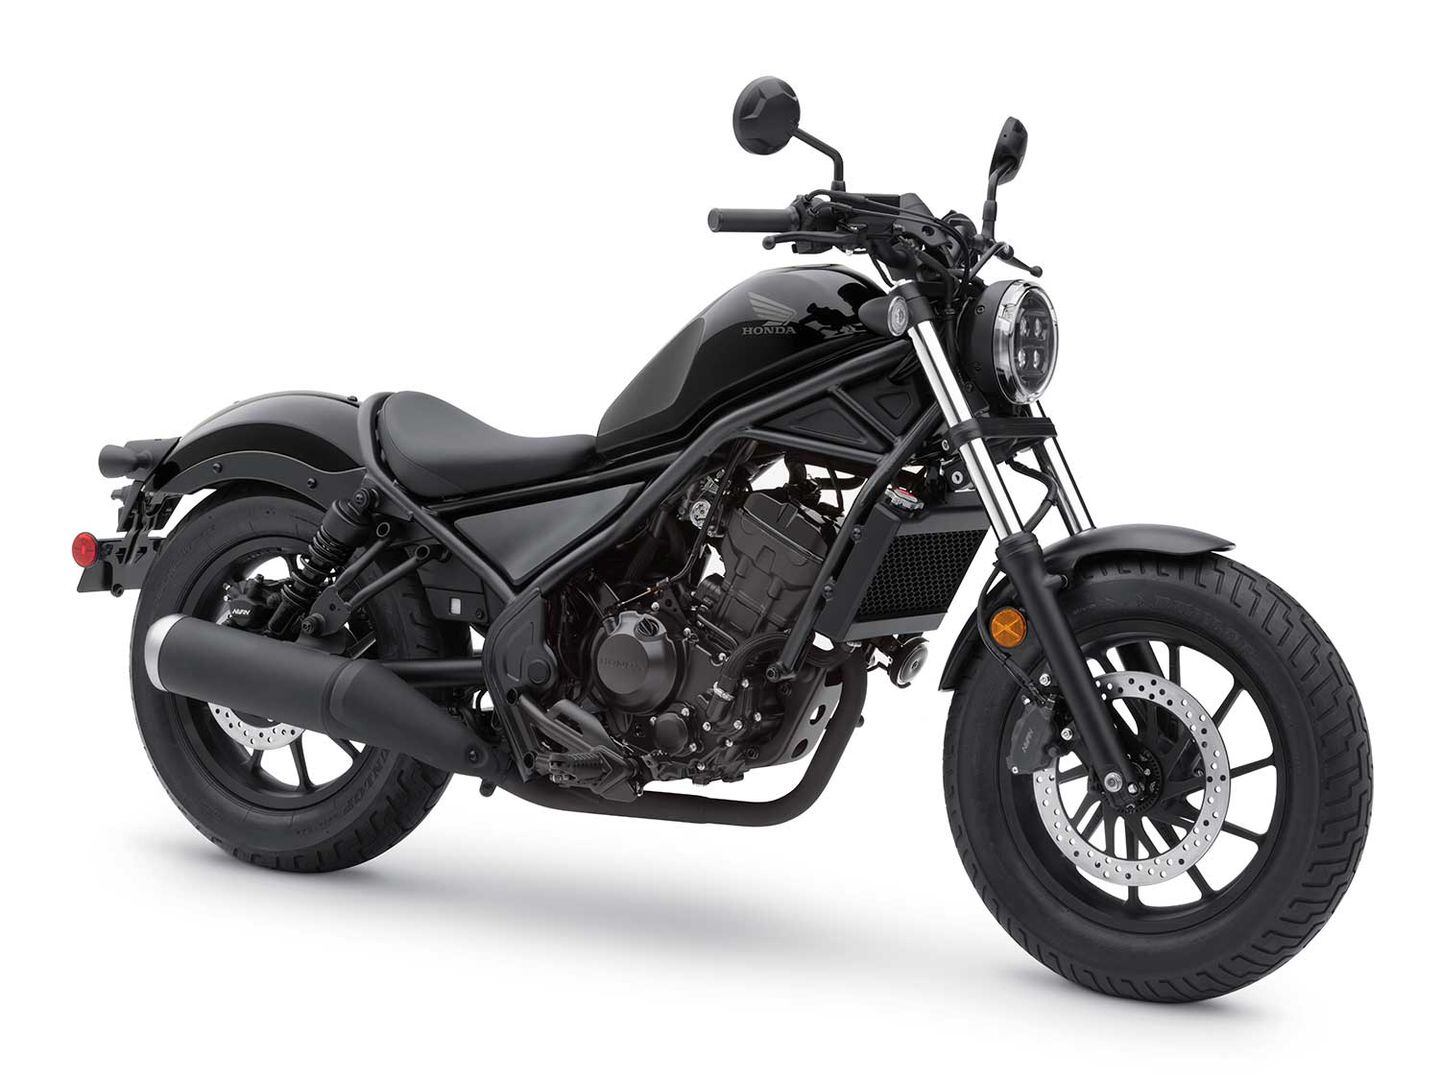 2020 Honda Rebel 300 And 500 Preview Photo Gallery | Motorcyclist